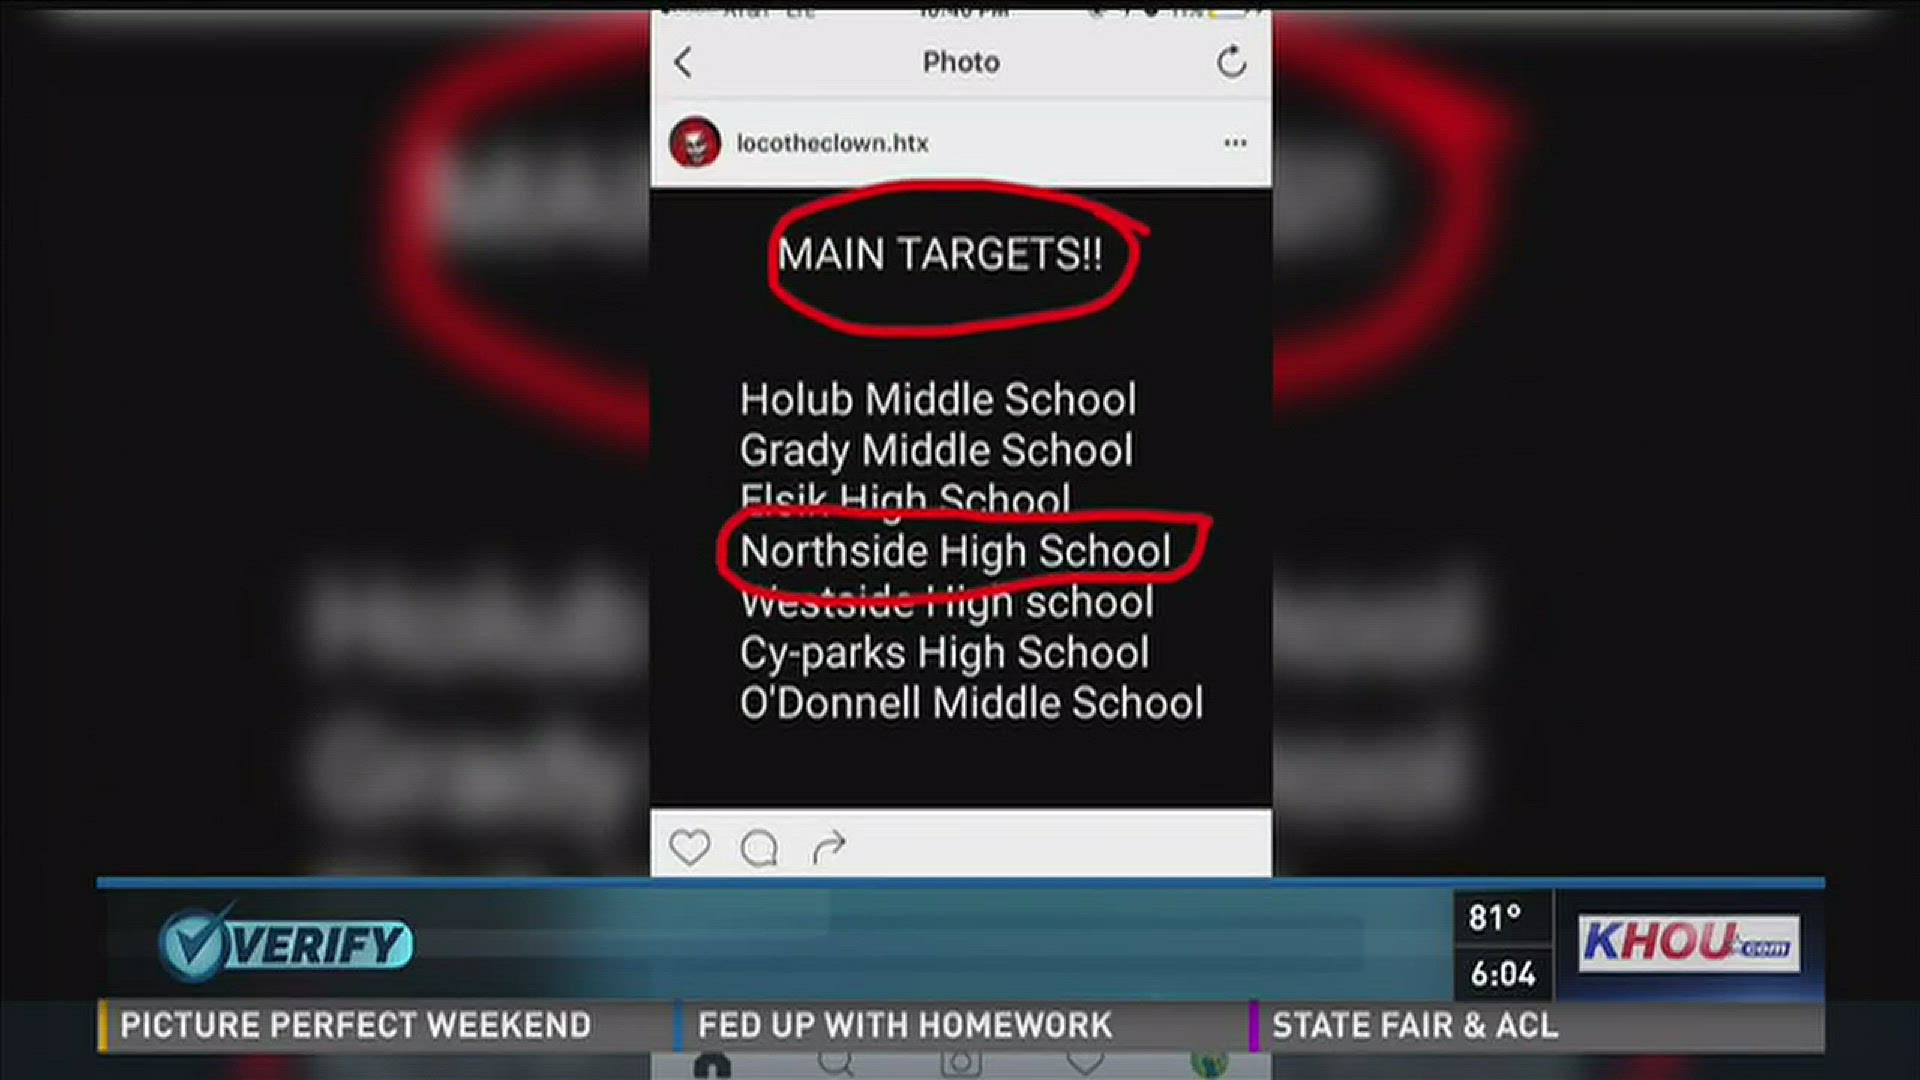 People posing as clowns on social media are forcing schools nationwide to send letters to parents and some have even locked down.